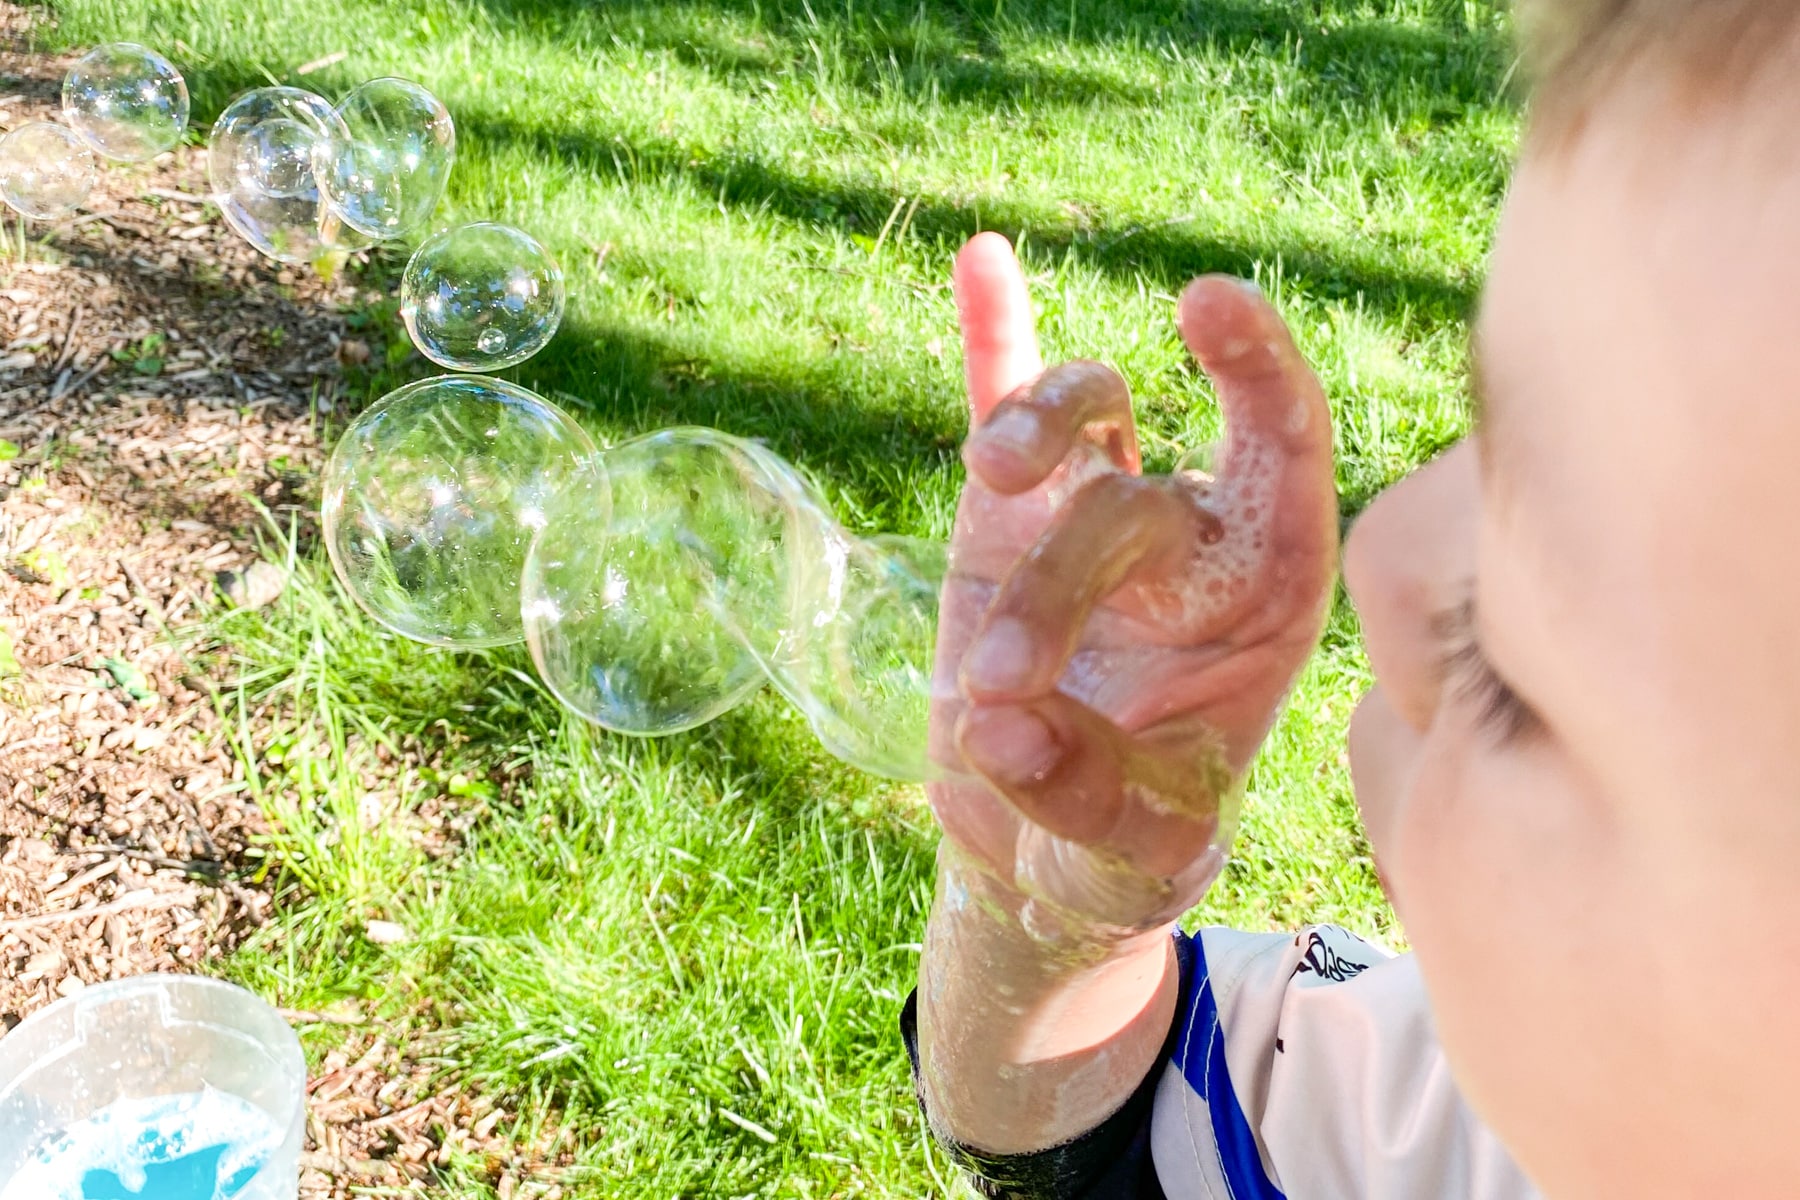 boy holding thumb and index finger together in ok sign and blowing bubbles through it.